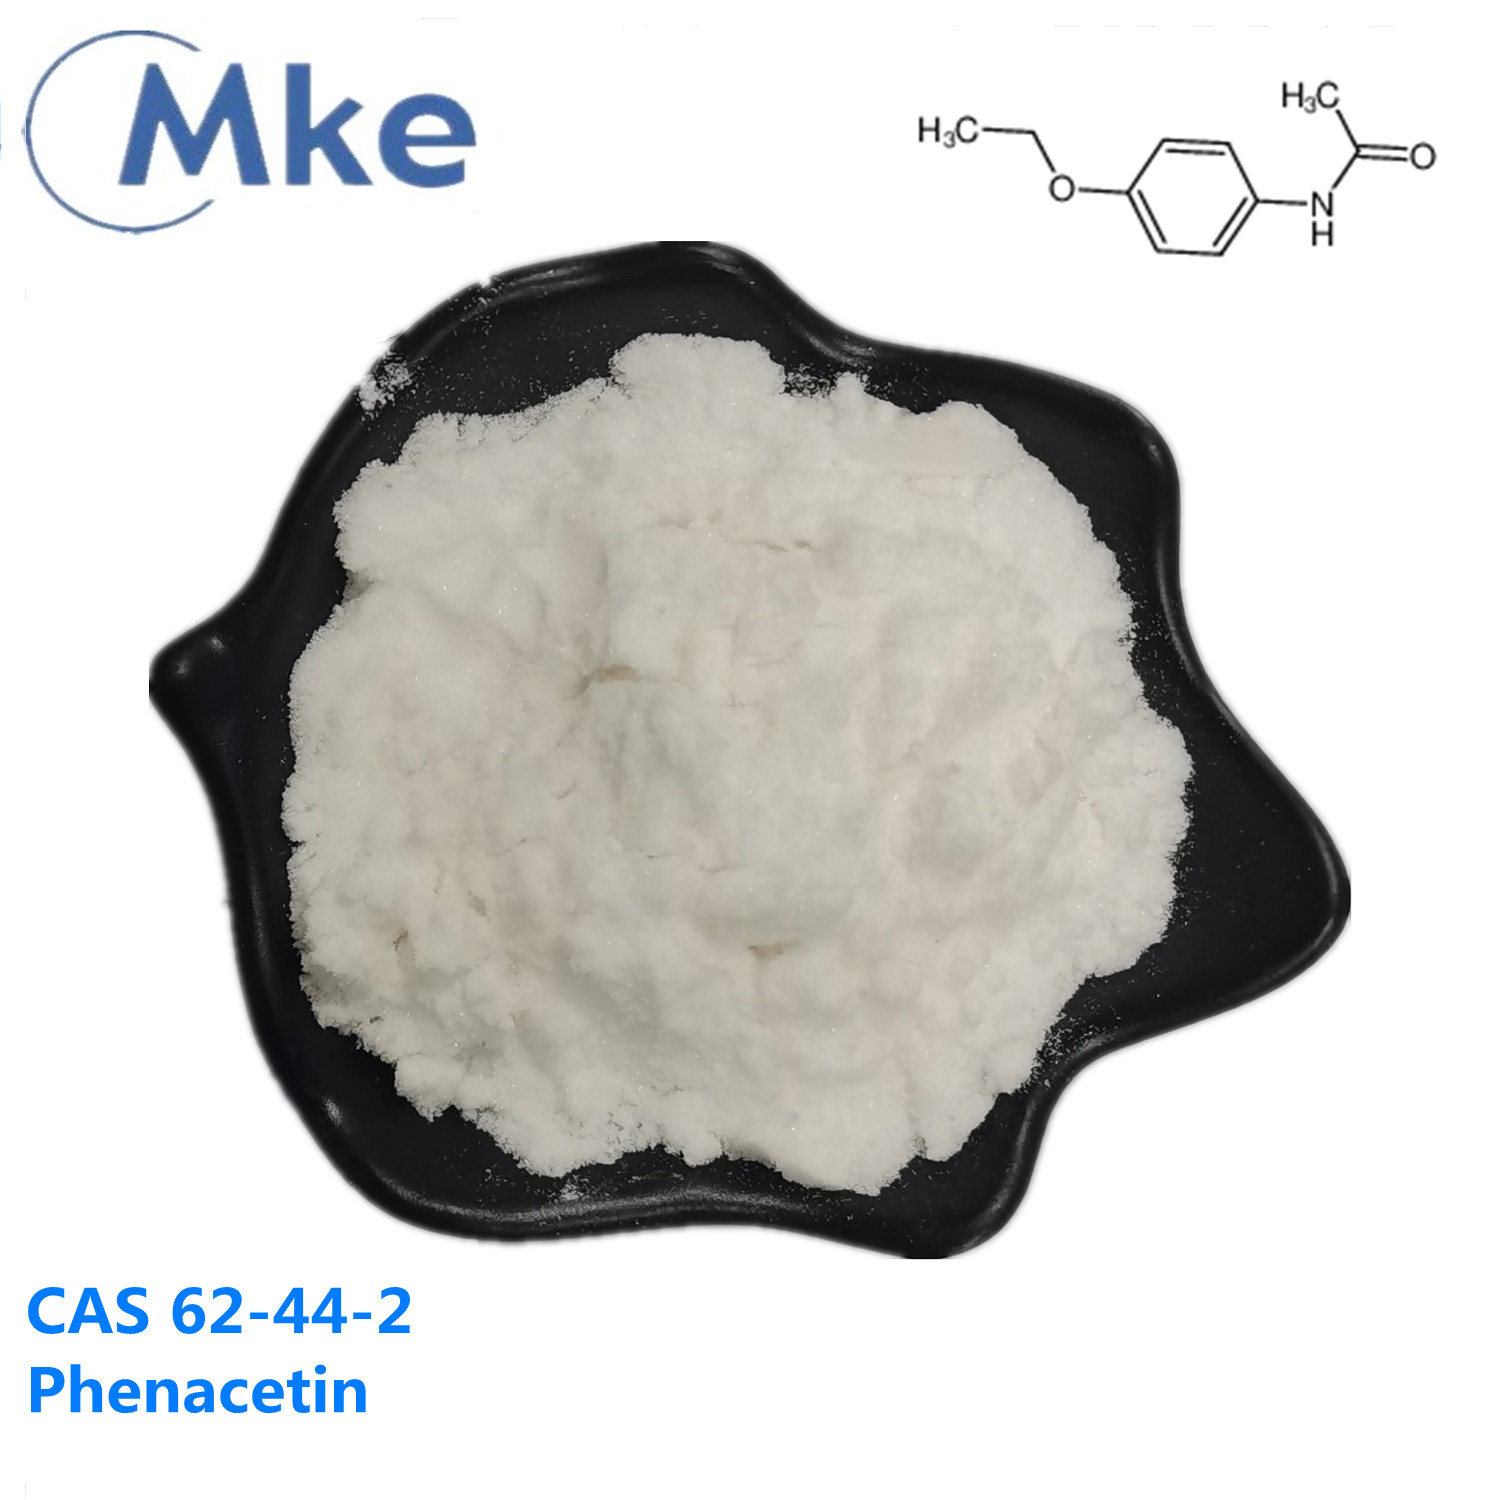 High quality phenacetin/ acetphenetidin cas 62-44-2 with large stock and low price